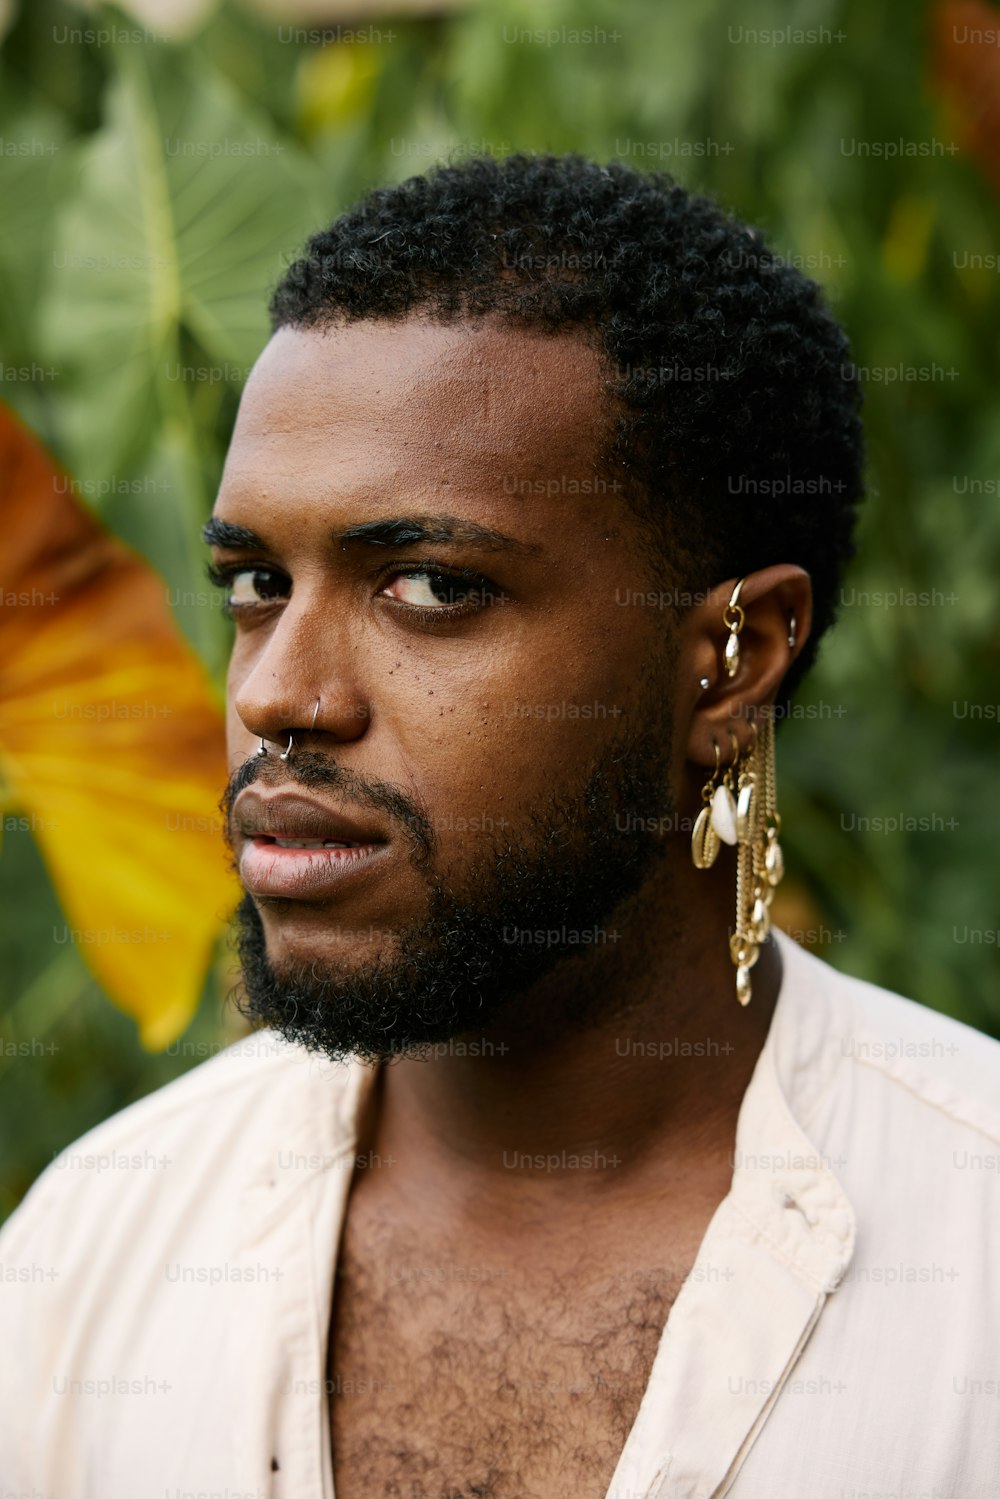 a close up of a person wearing a shirt and earrings